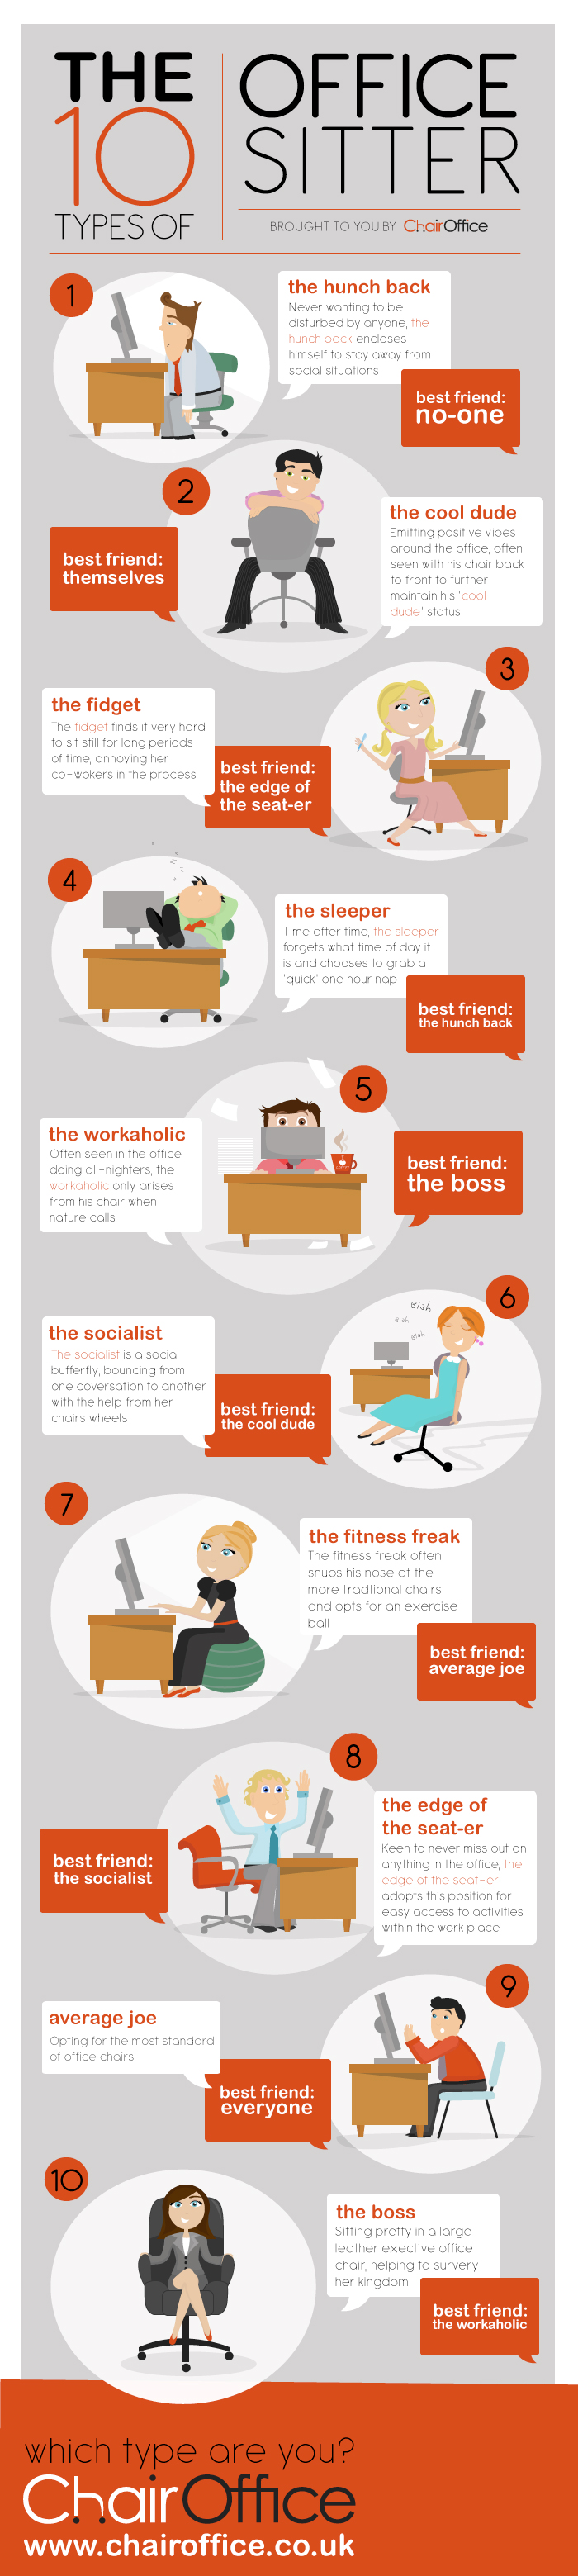 The 10 Types of Office Sitter